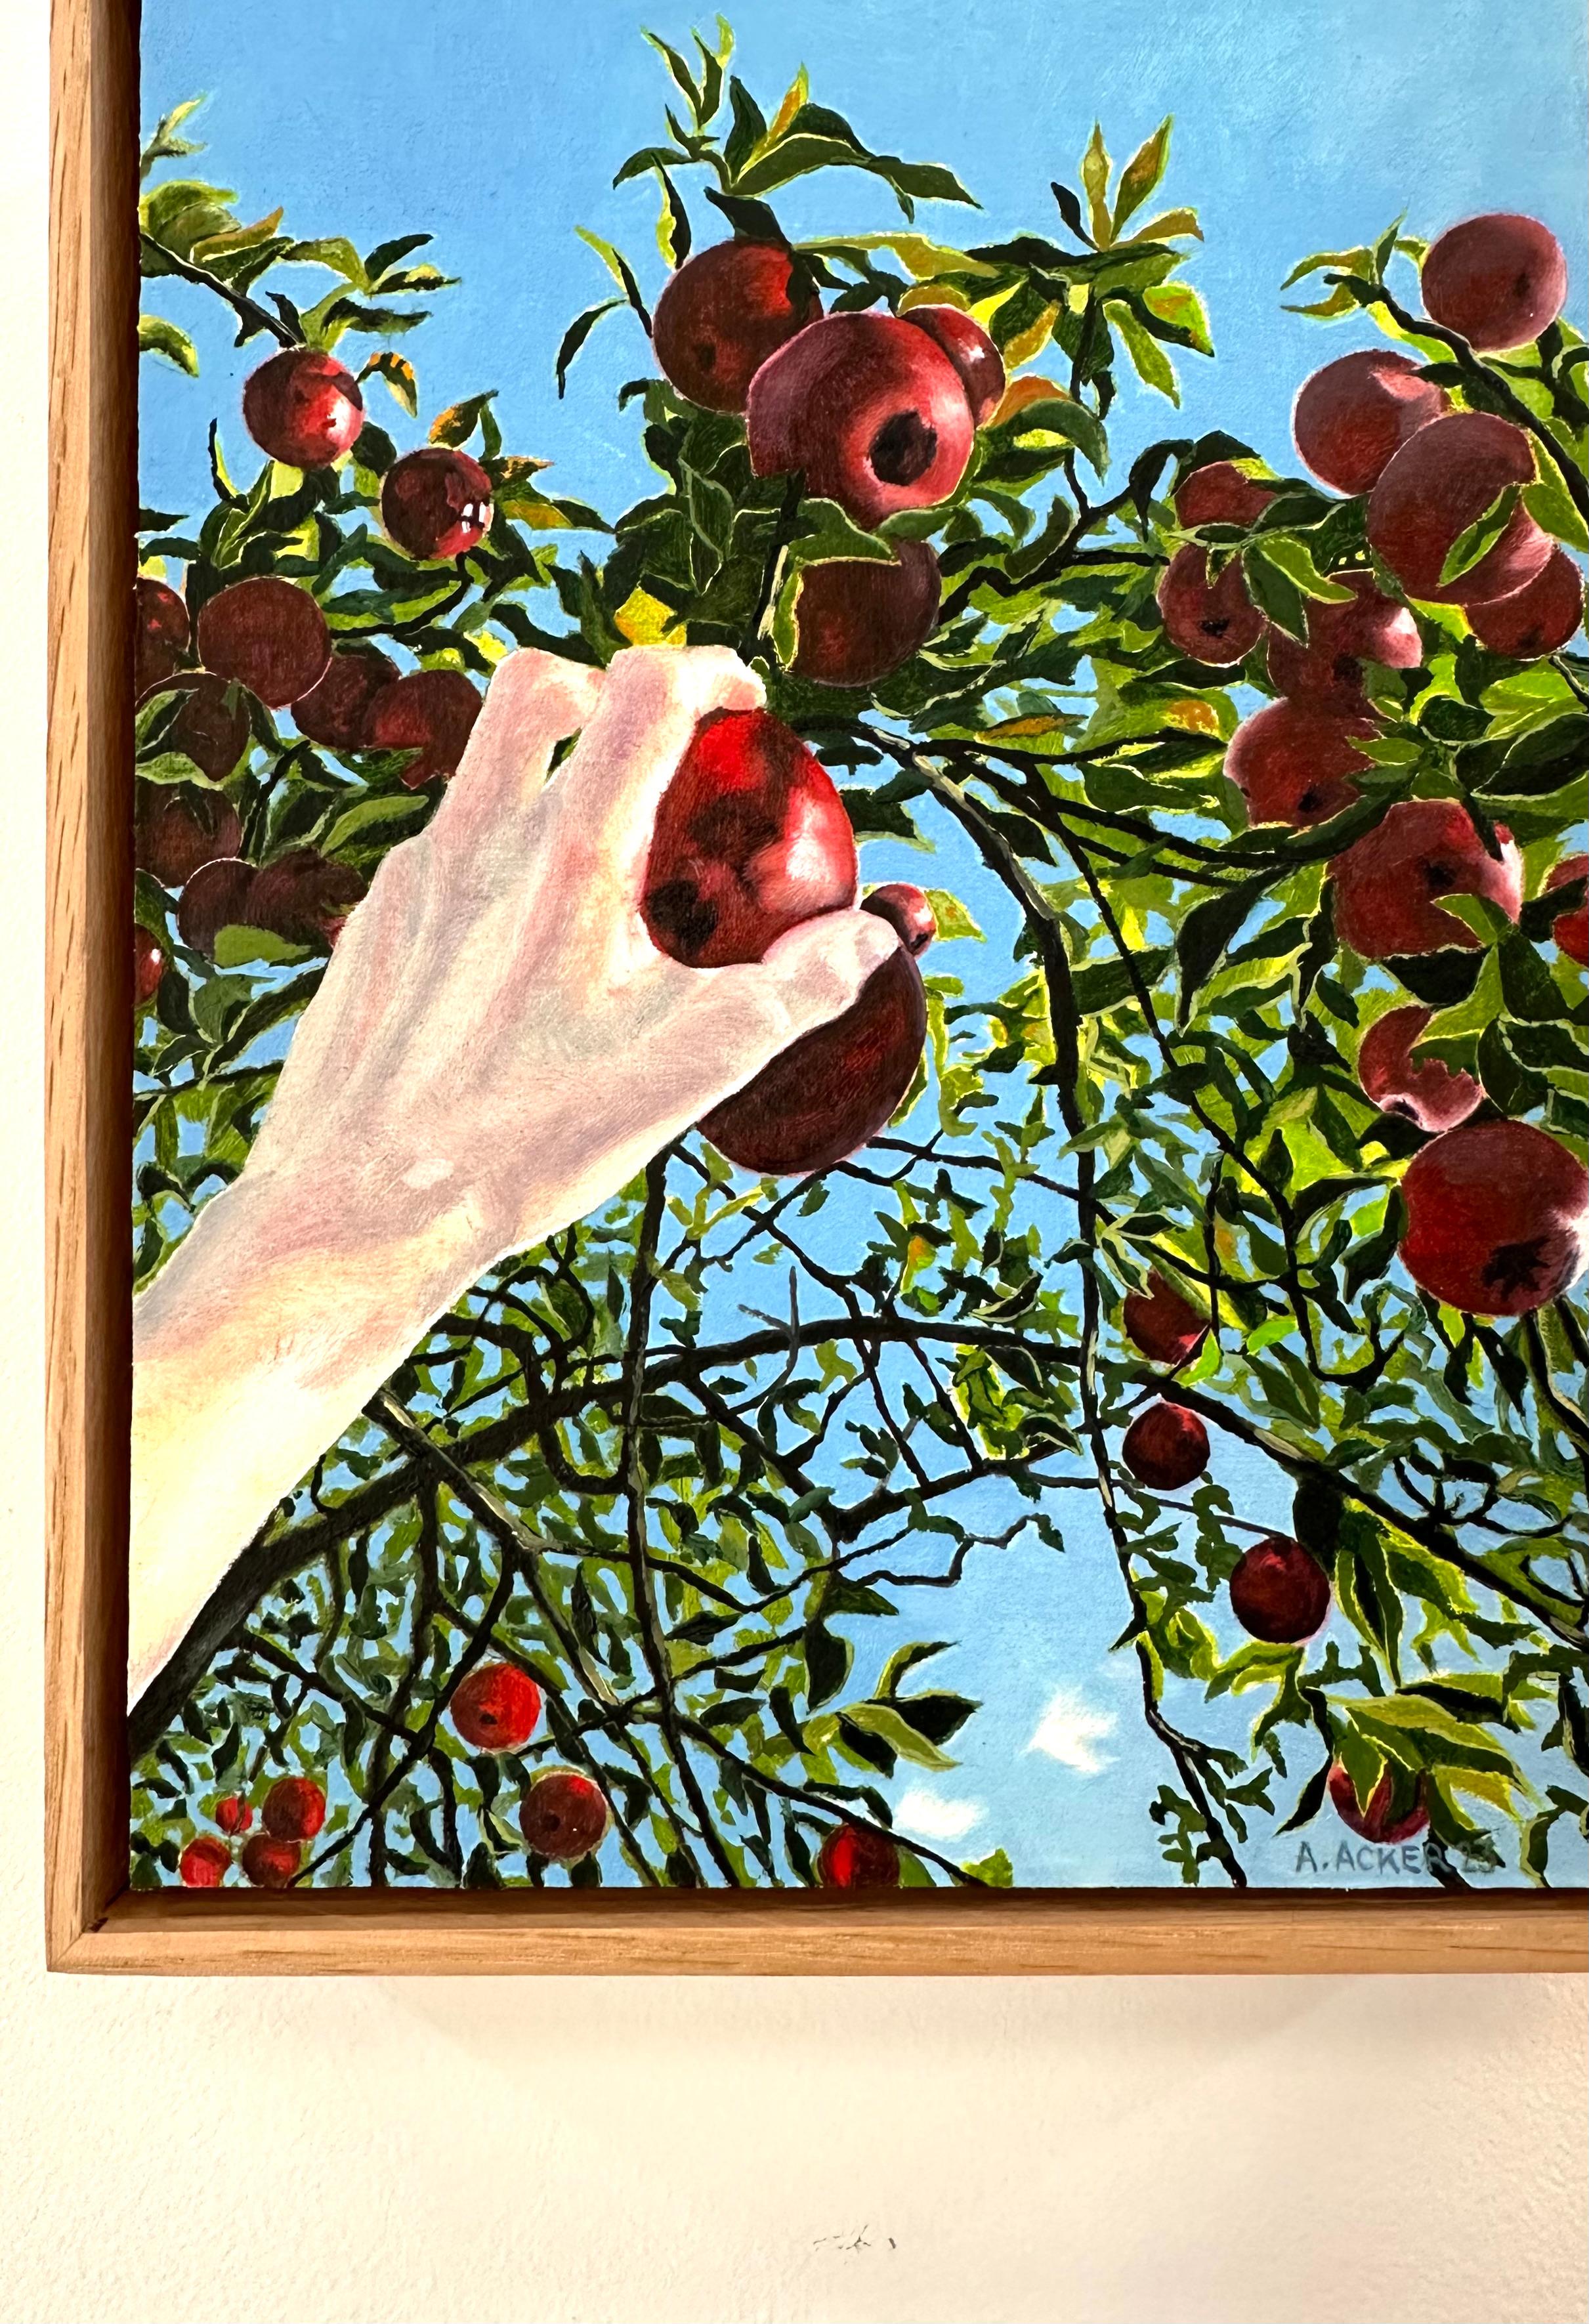 Ruby red apples and lush green leaves are vibrant against a blue sky, while a hand reaches to pluck one of the fruits from the apple tree. Signed and dated on recto, signed, dated and titled on verso and framed in a natural wood float frame.
